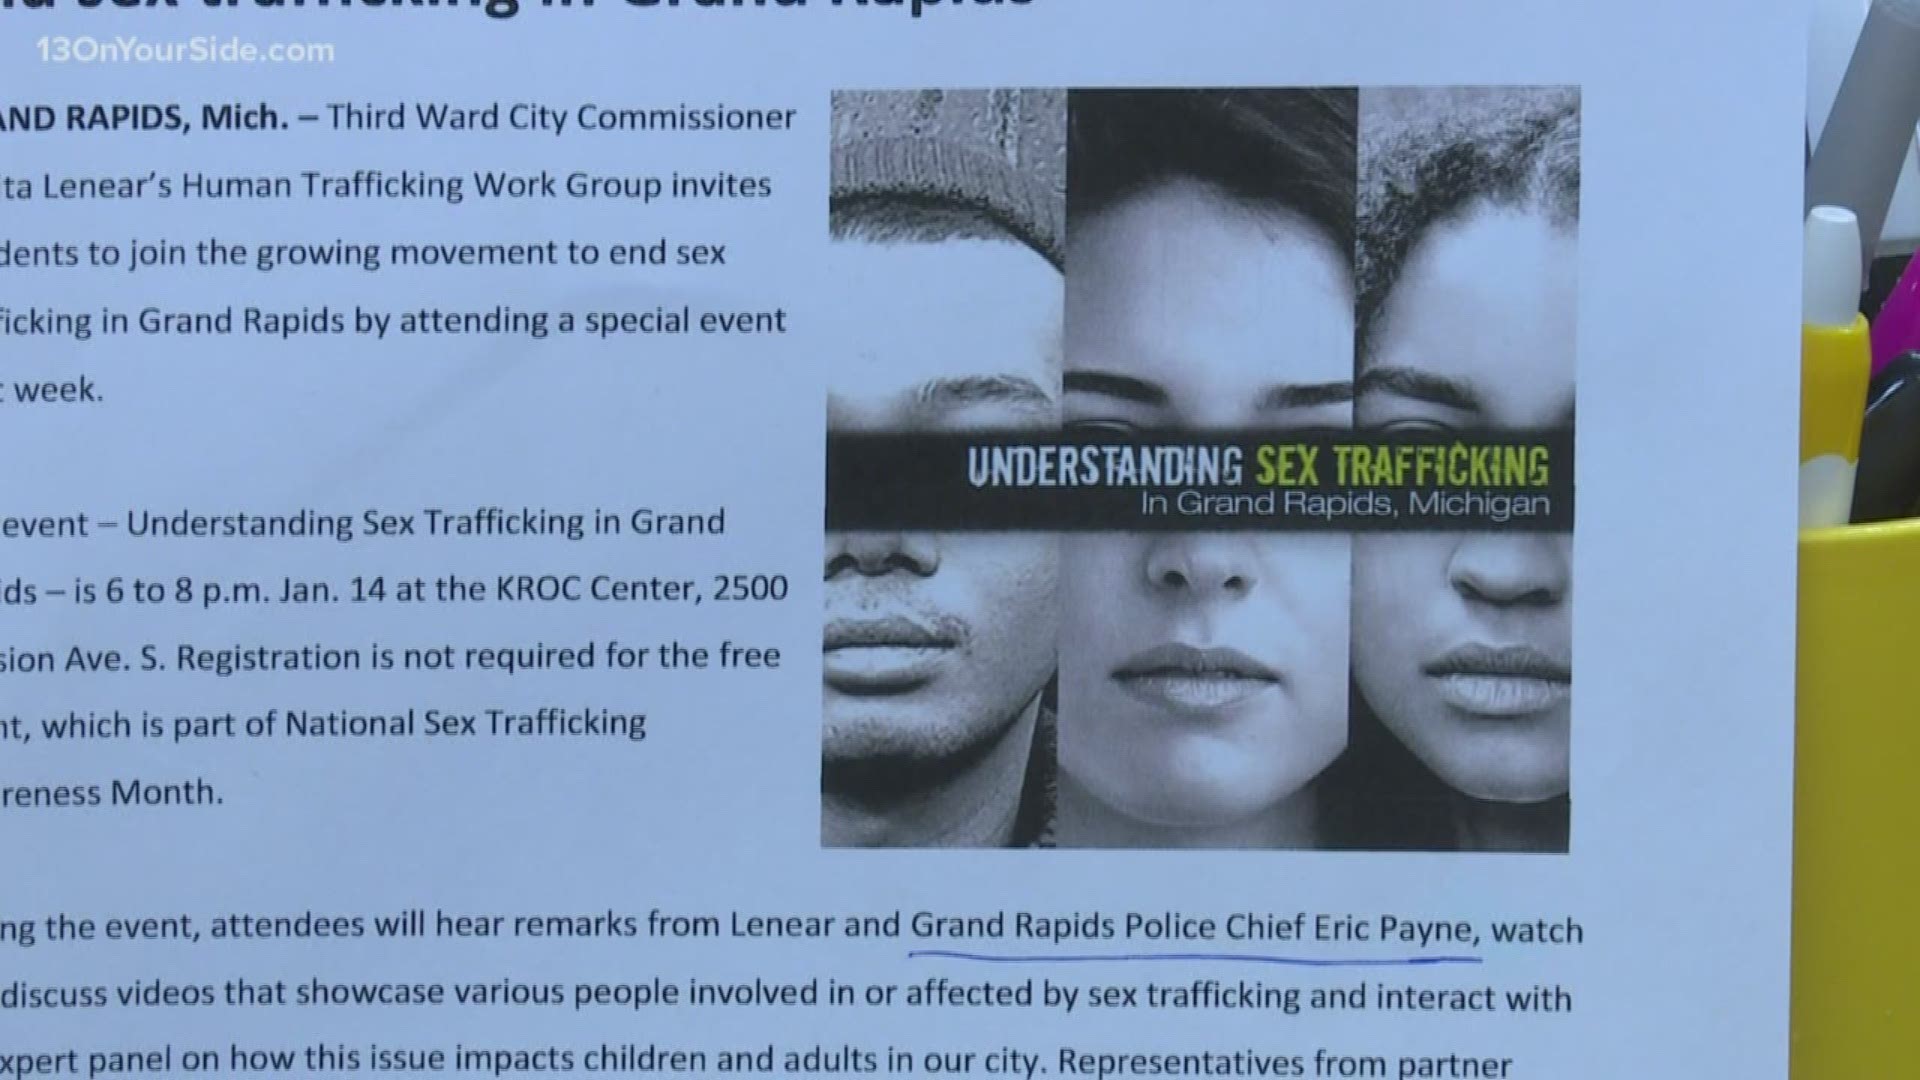 The community is invited to join a growing movement to bring an end to sex trafficking in Grand Rapids through a special event Tuesday evening.